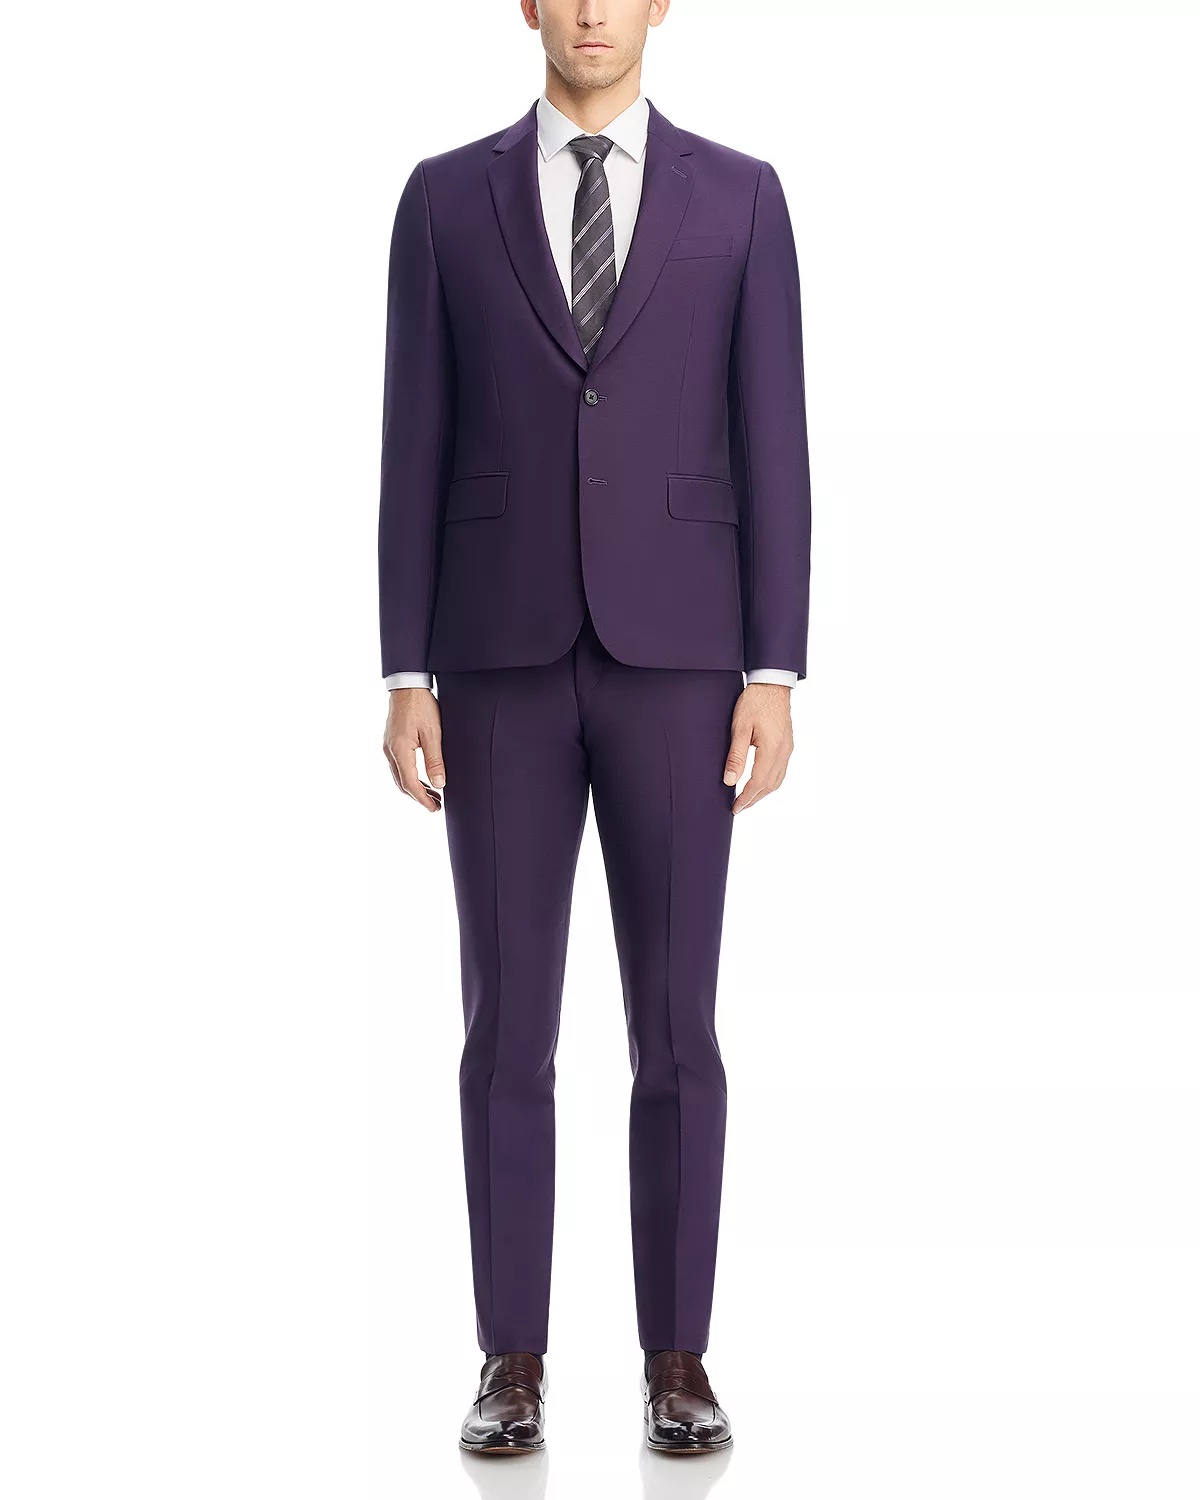 Soho Wool & Mohair Extra Slim Fit Suit - 2